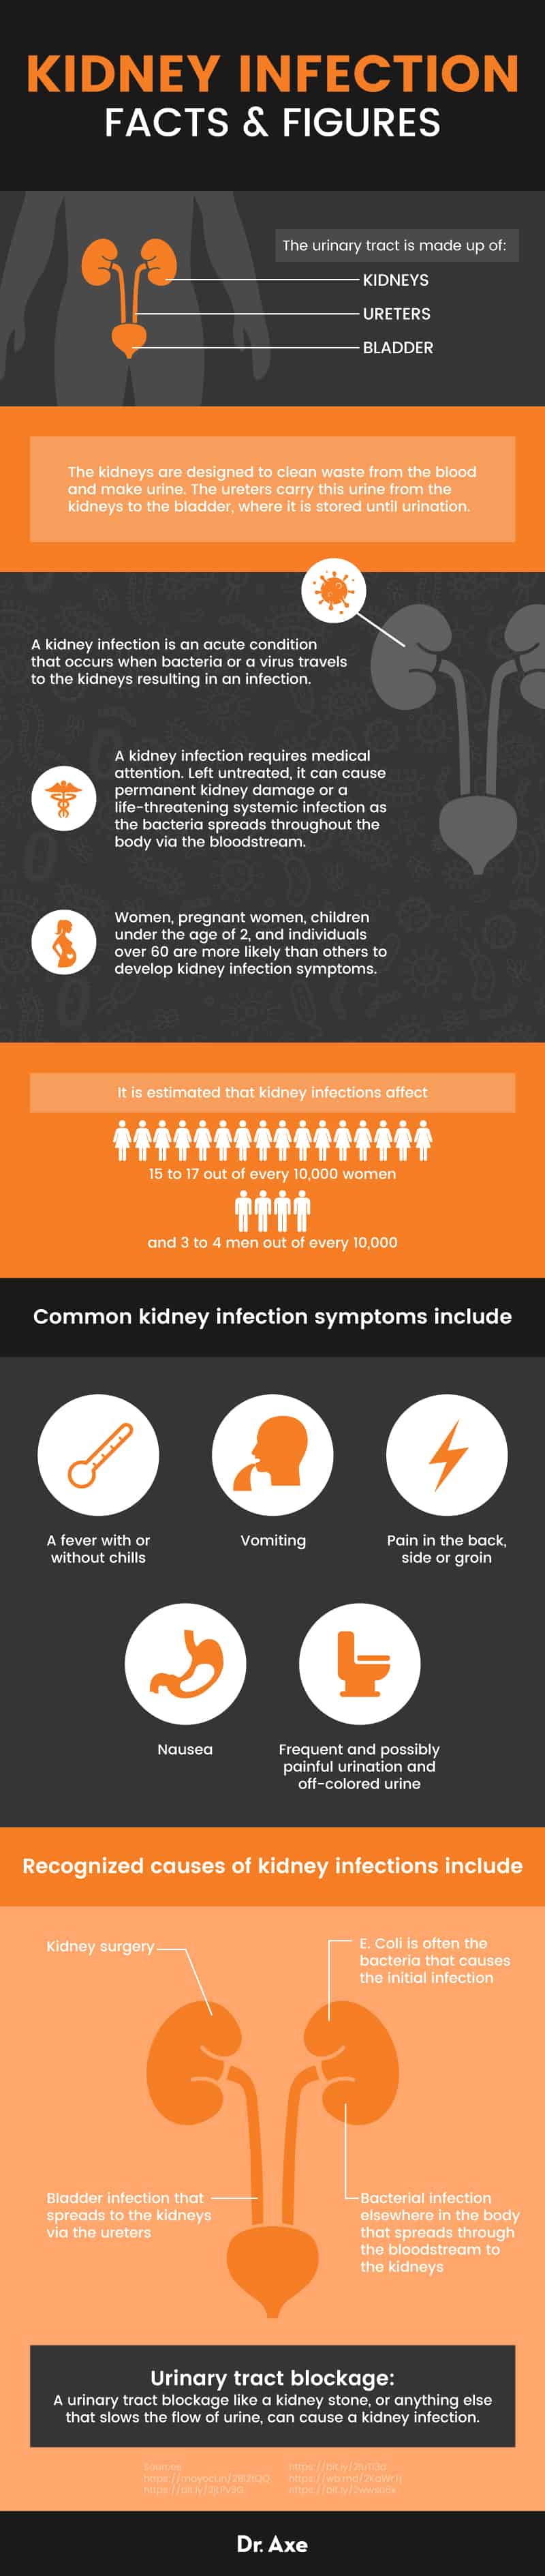 Kidney infection symptoms - Dr. Axe